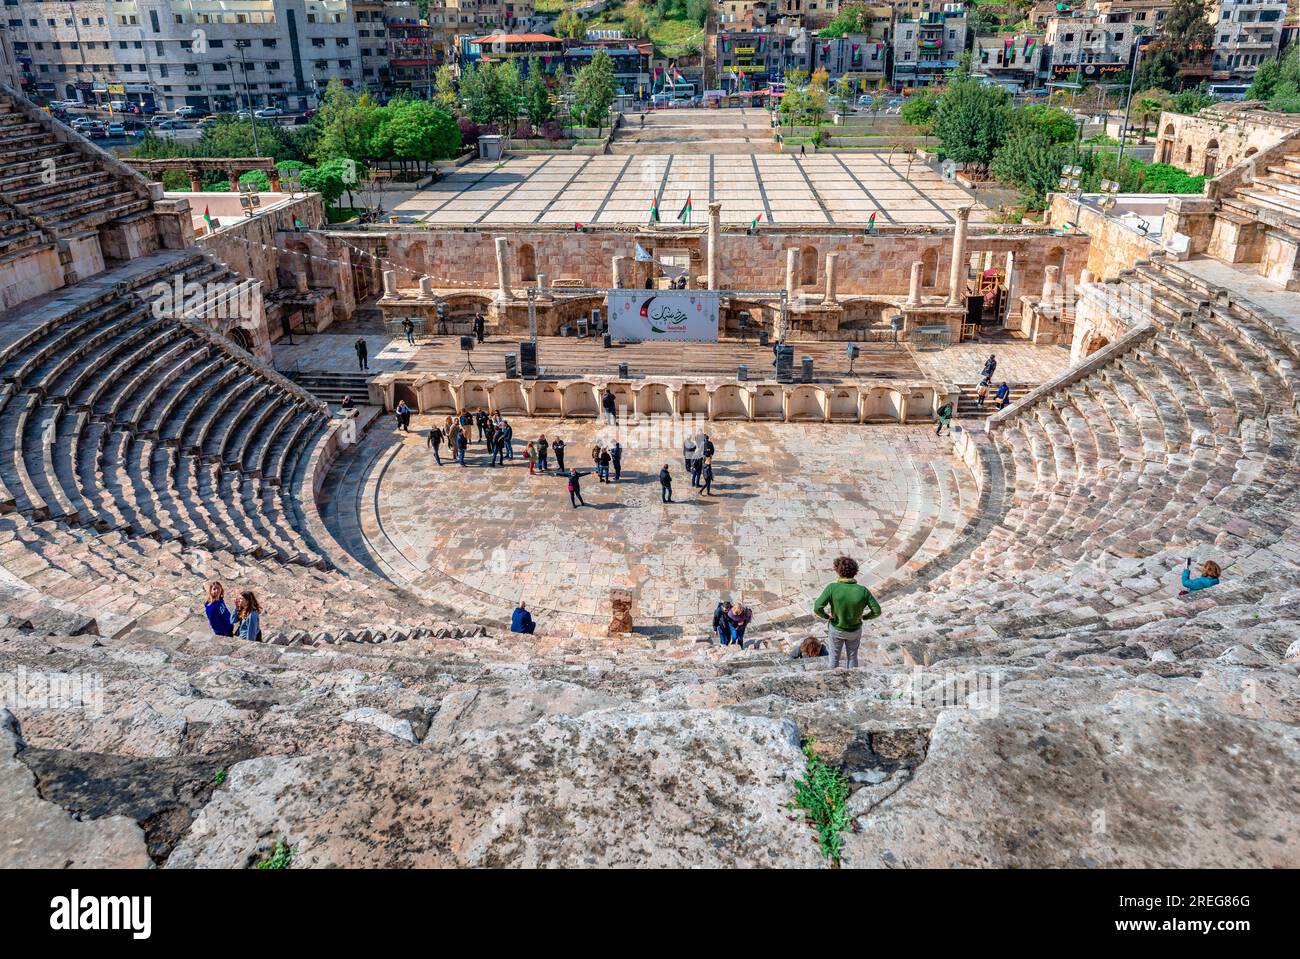 Panoramic view of the Roman Theatre and the Hashemite Plaza, located in the eastern part of Amman, the cpaital of Jordan Stock Photo